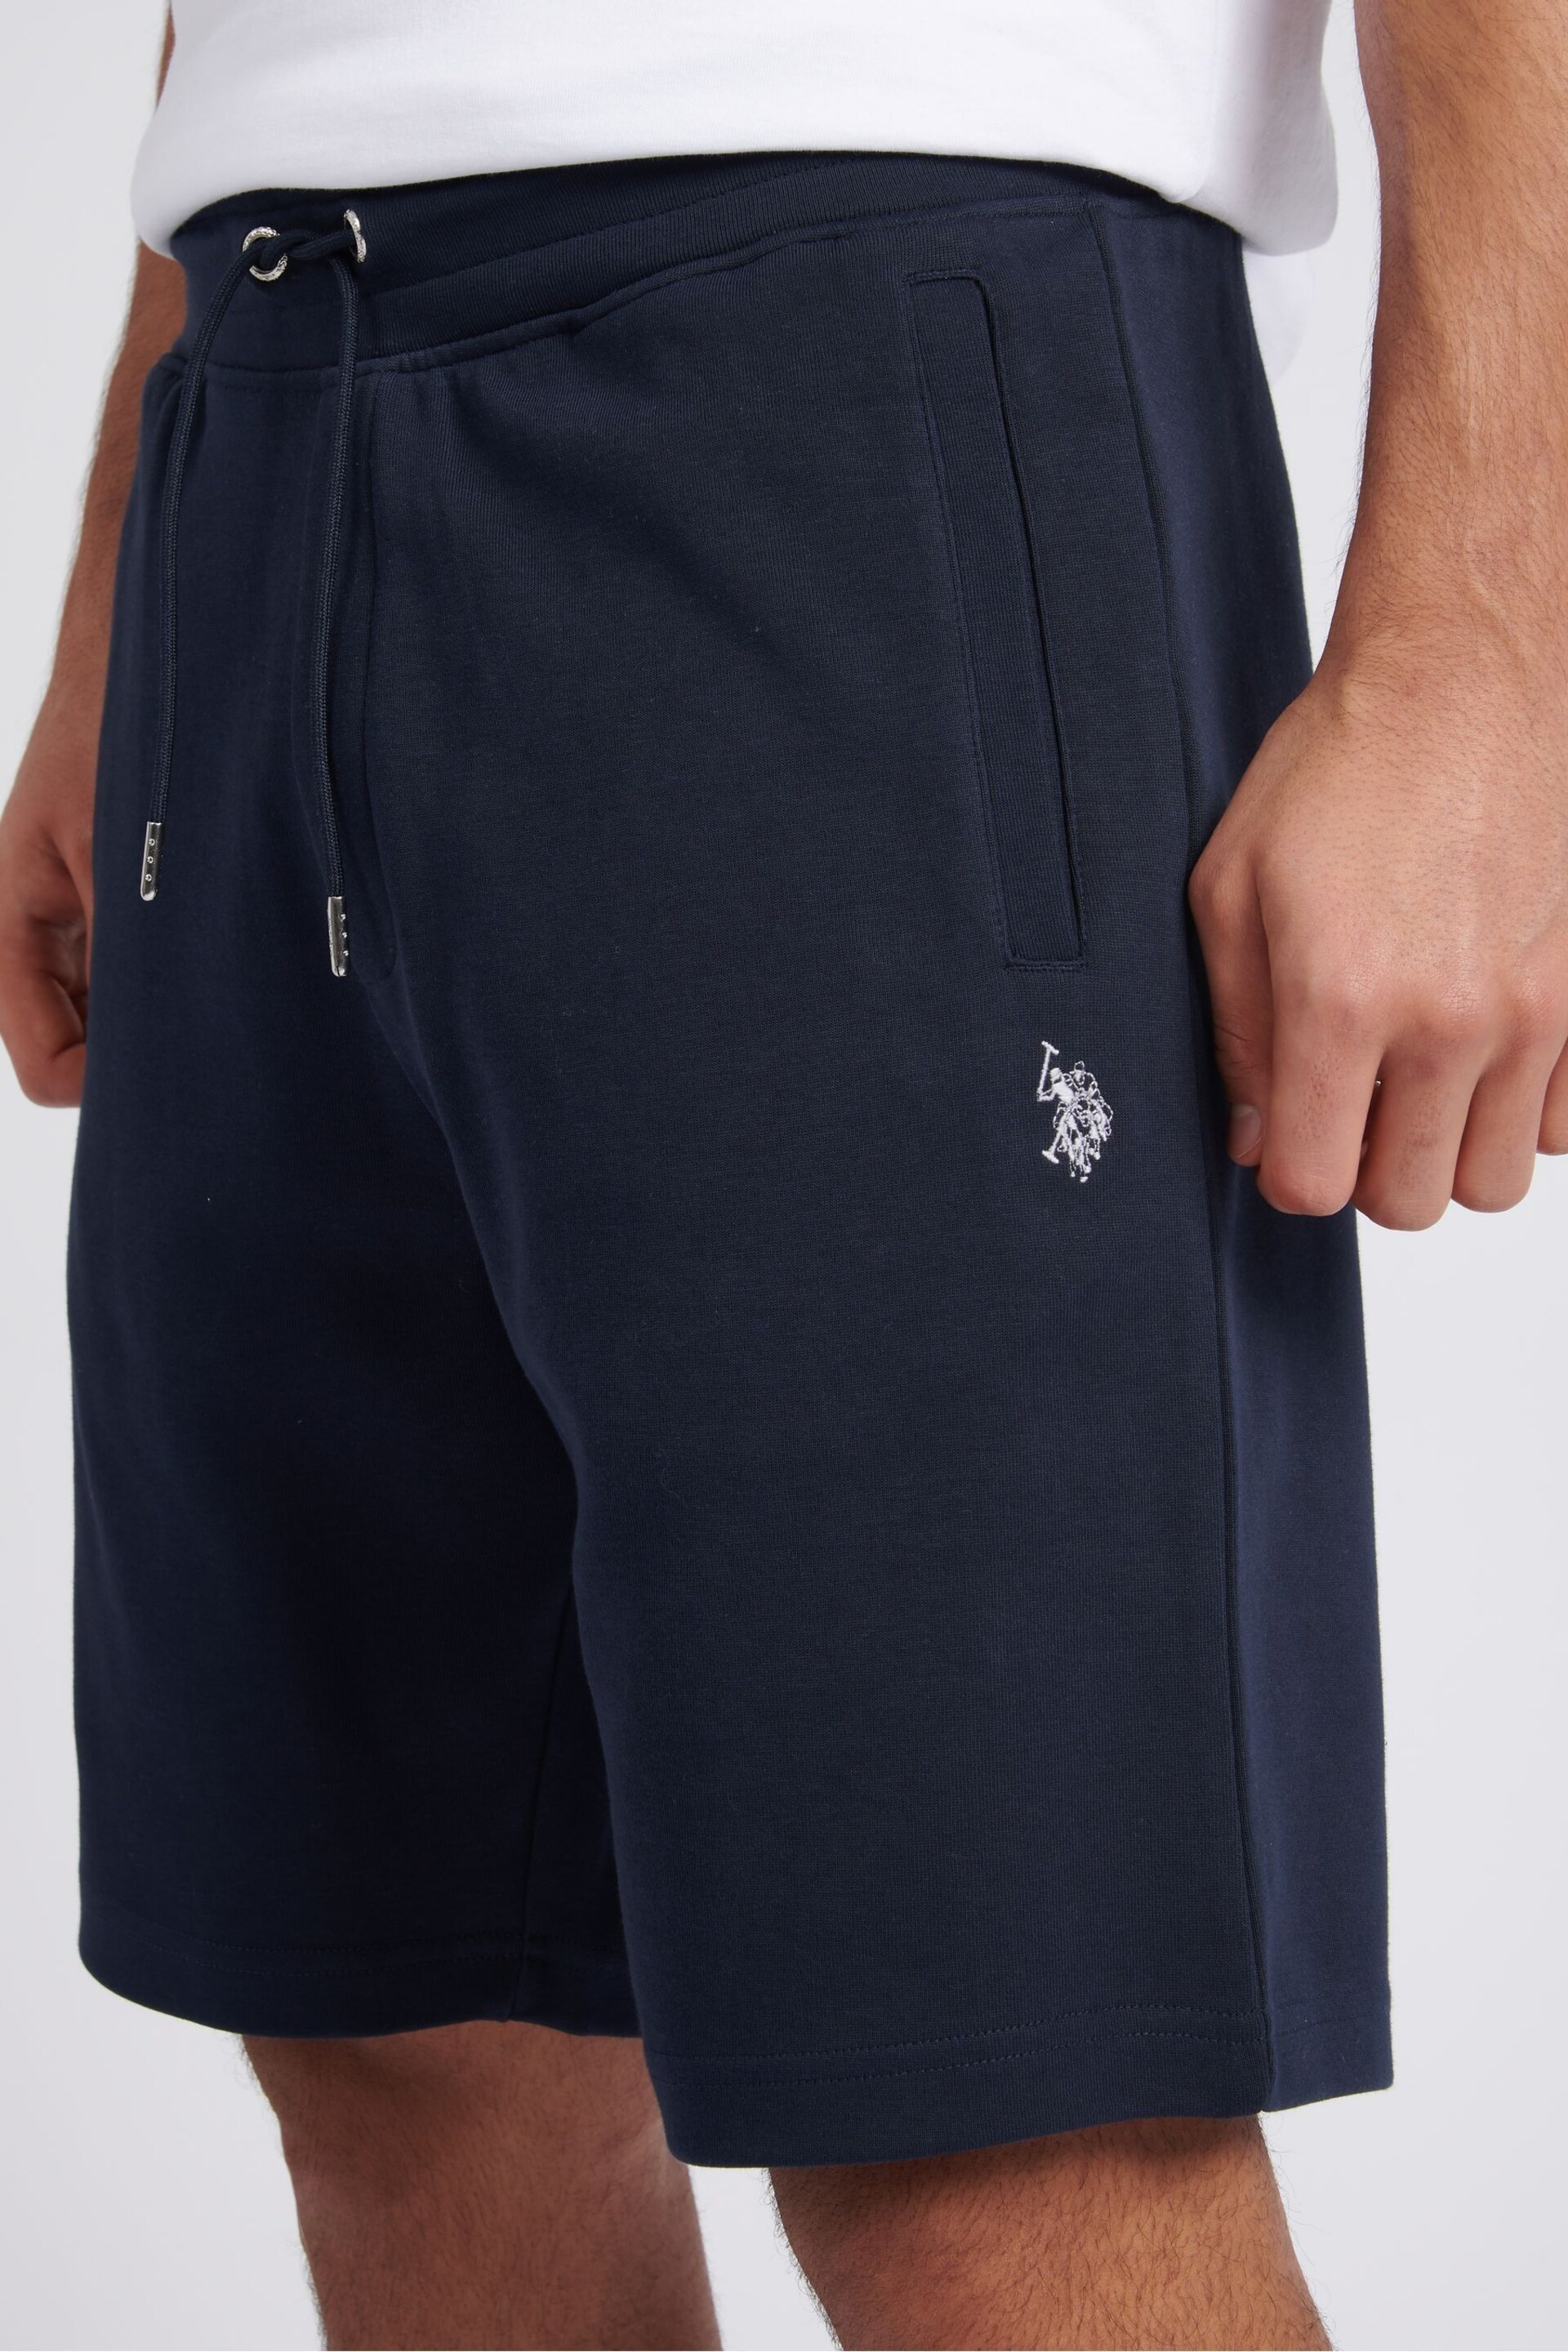 U.S. Polo Assn. Mens Classic Fit Blue Luxe Sweat Shorts - Image 2 of 3